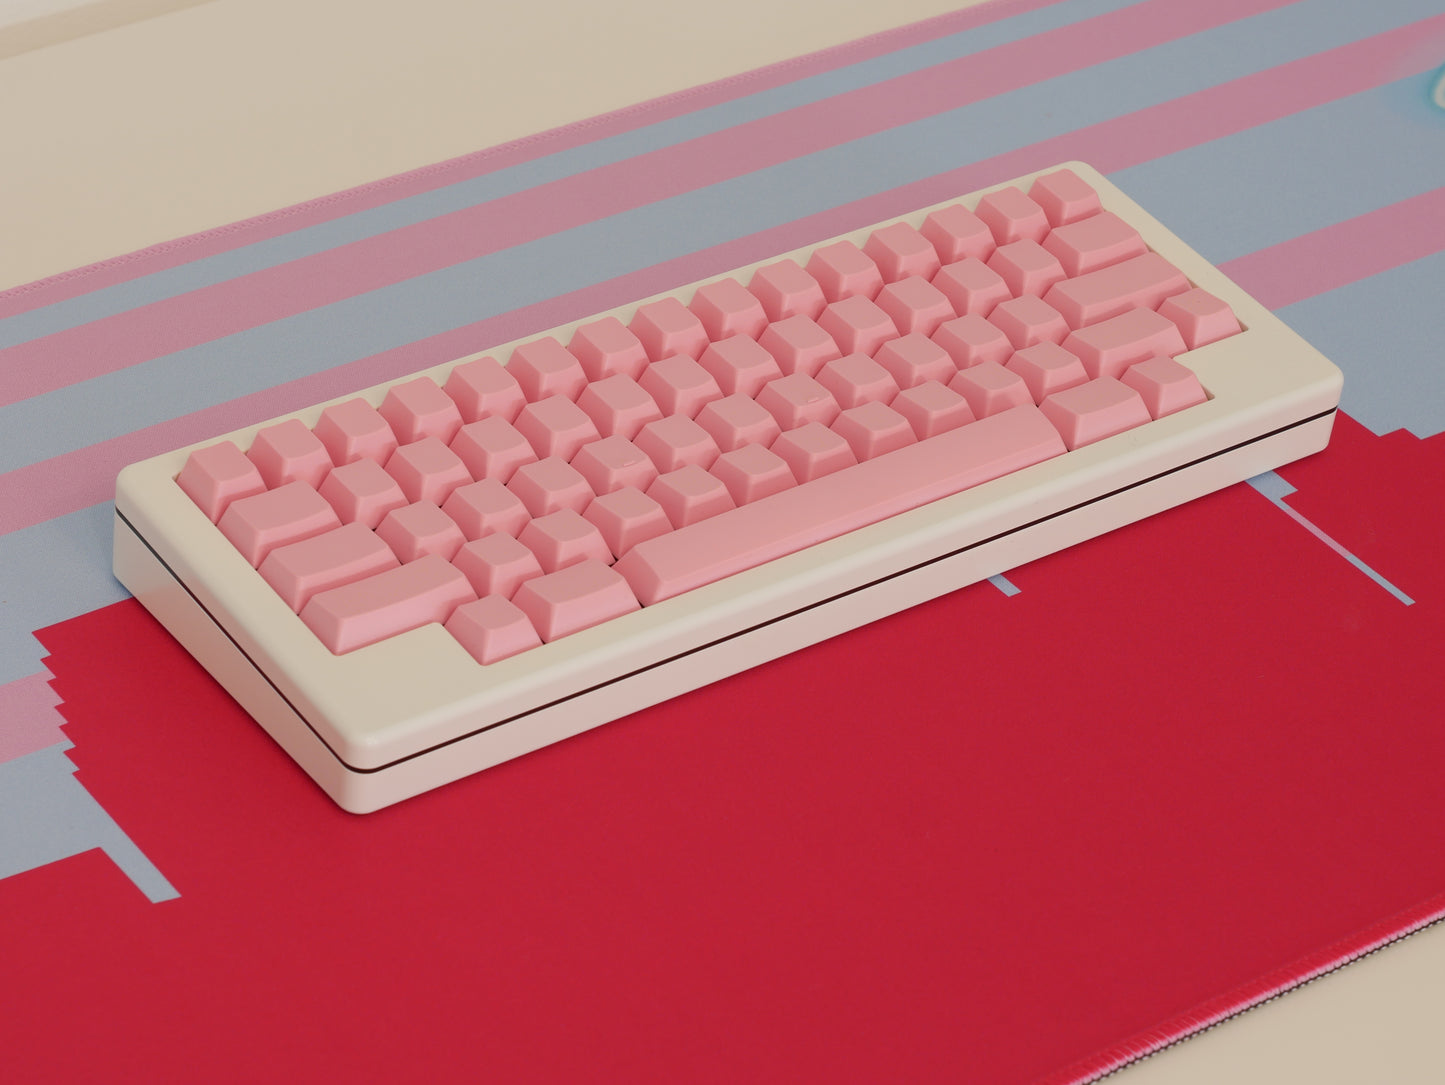 Middle of the pink and blue Miami skyline desk mat. A white keyboard with pink keycaps sits in the middle.